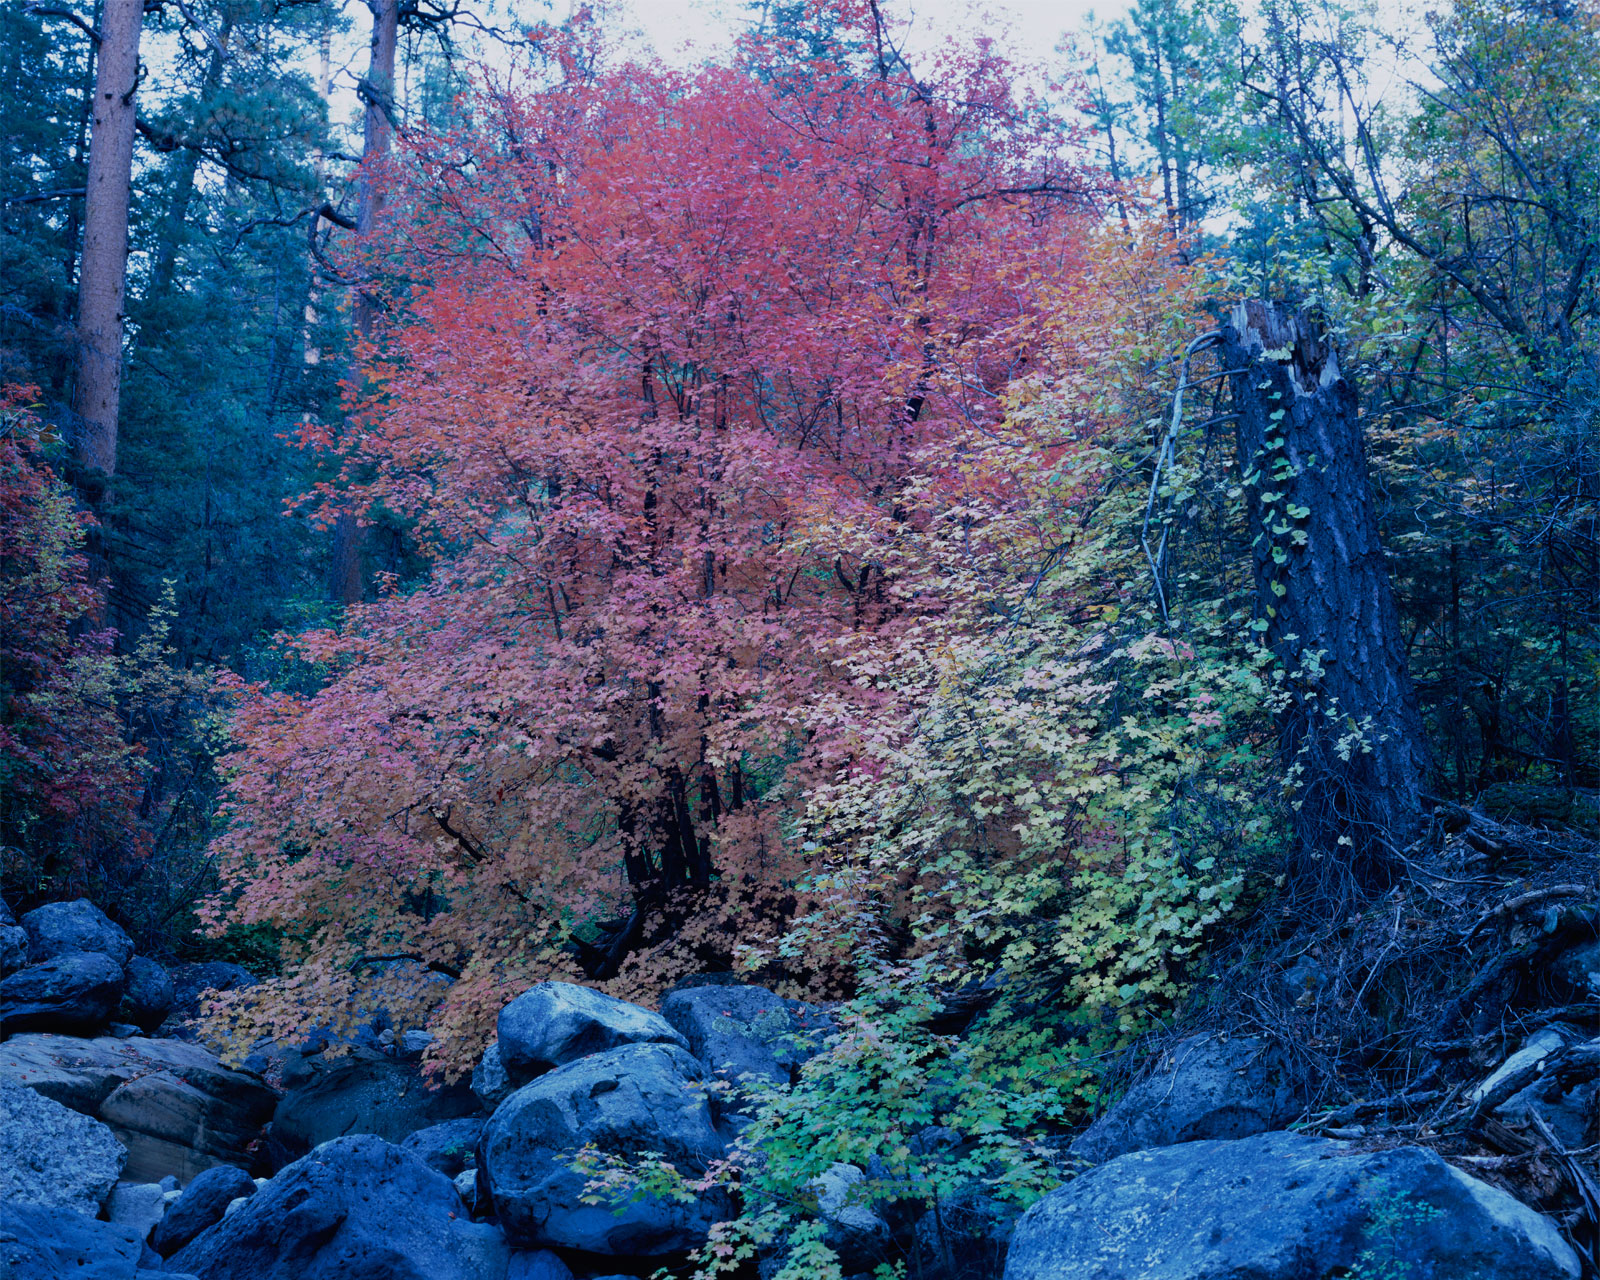 Fall leaves on the Maples near Cave Springs in Oak Creek Canyon